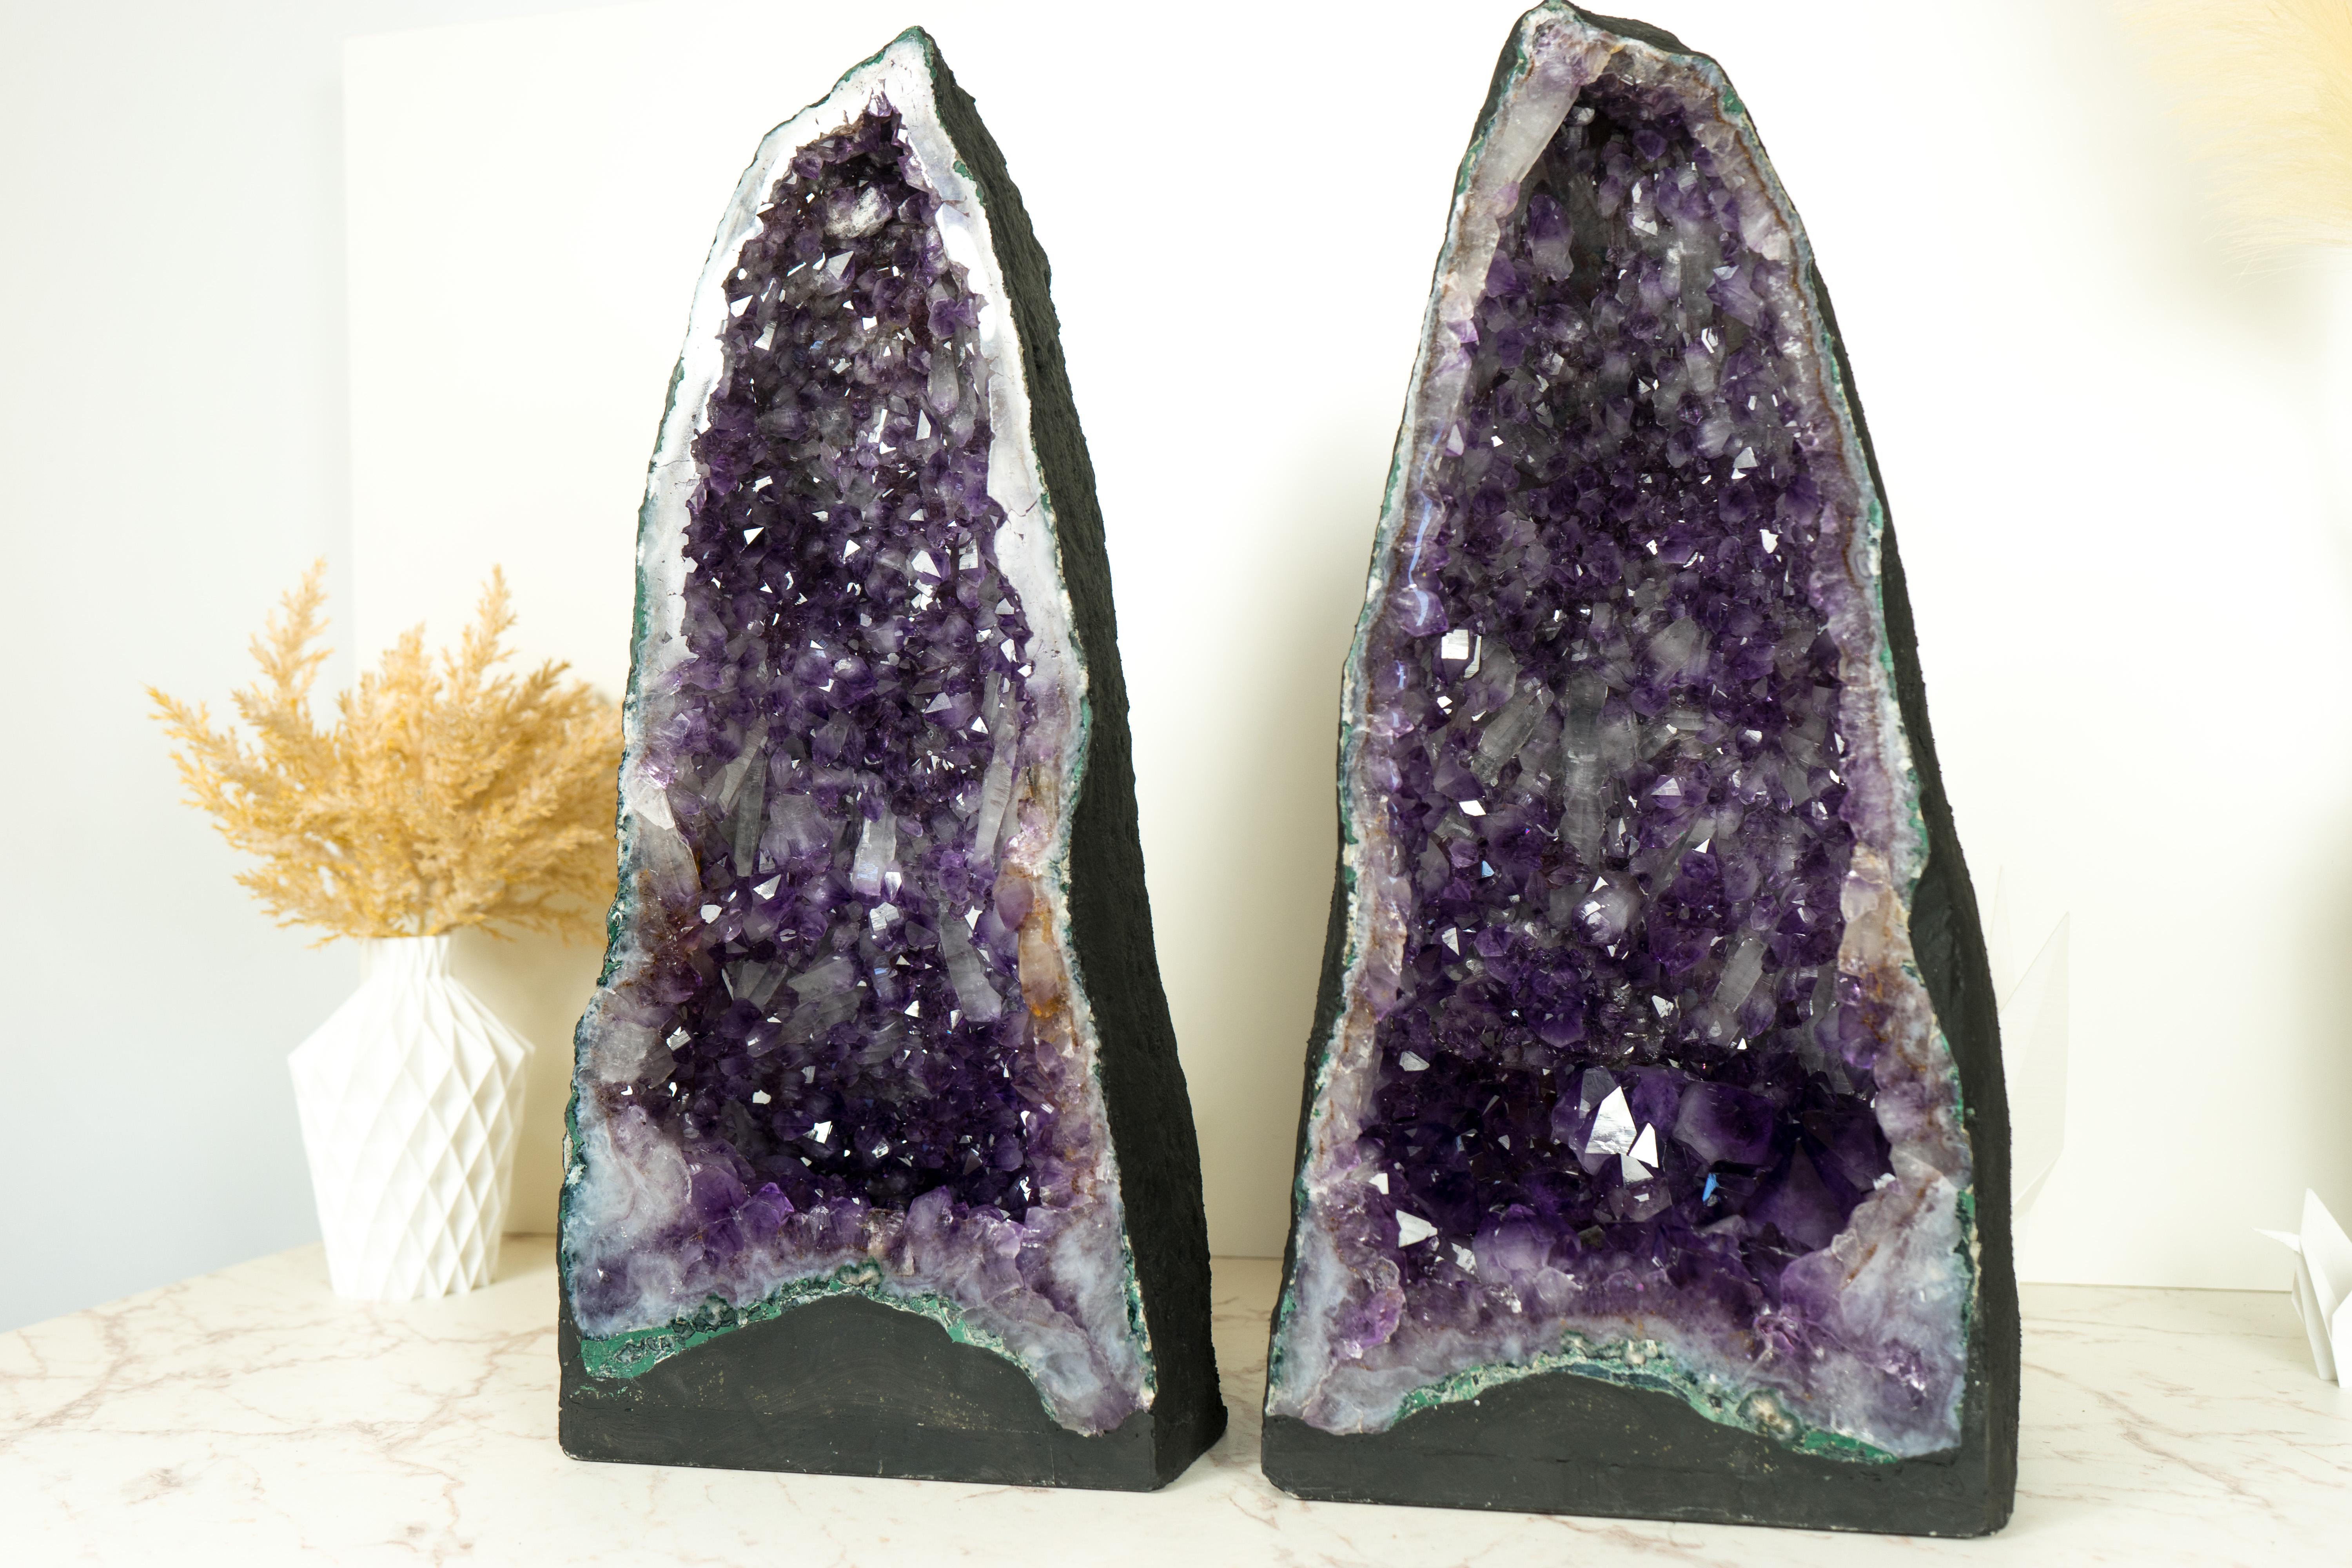 Pair of Tall Deep Purple Amethyst Crystal Geode Cathedrals, with Rare Druzy For Sale 4